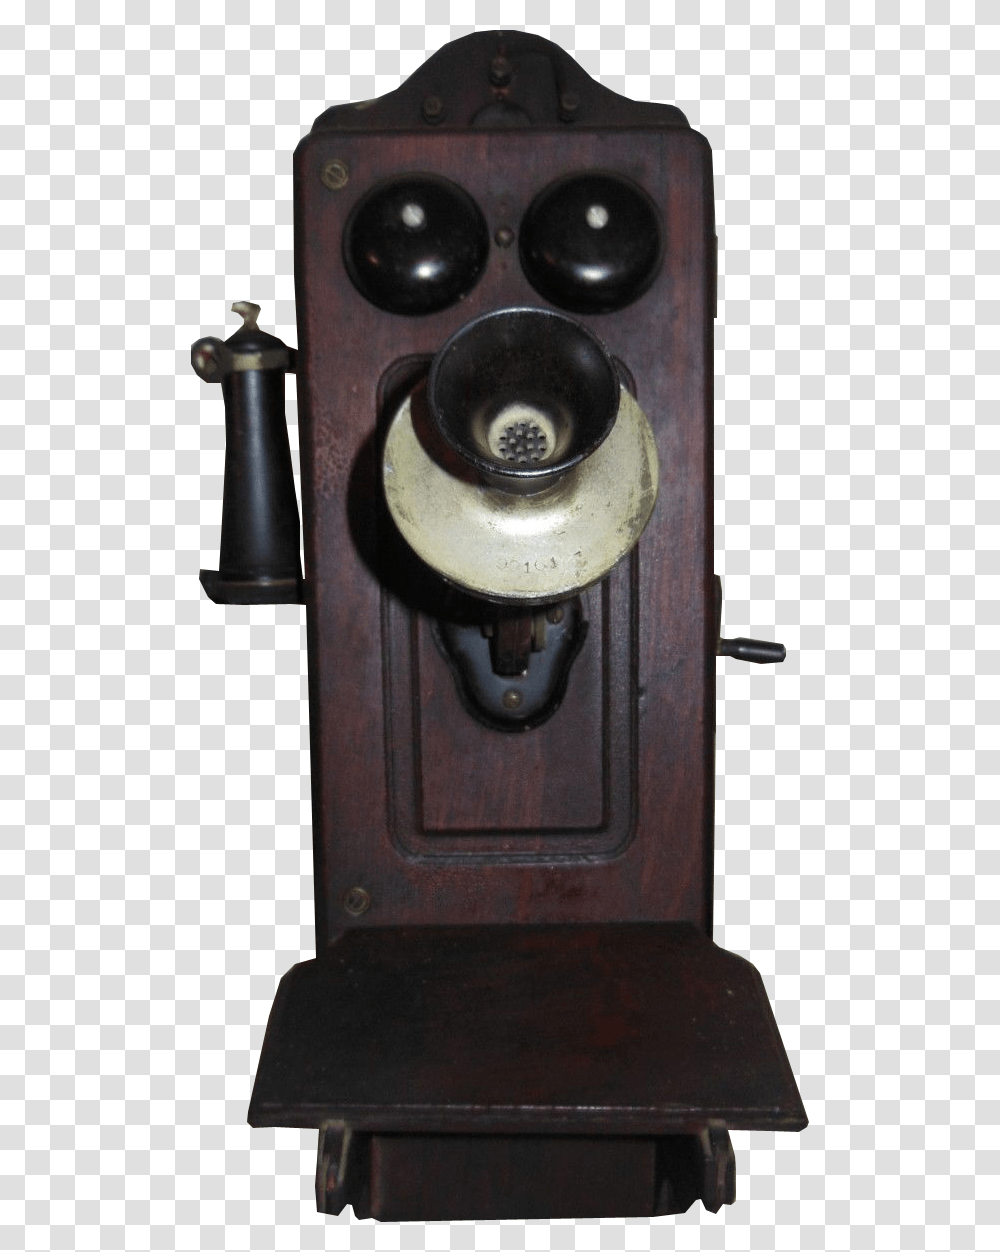 Vintage Wall Mount Telephone Image Antique Wall Mount Phone, Electronics, Dial Telephone, Camera Transparent Png